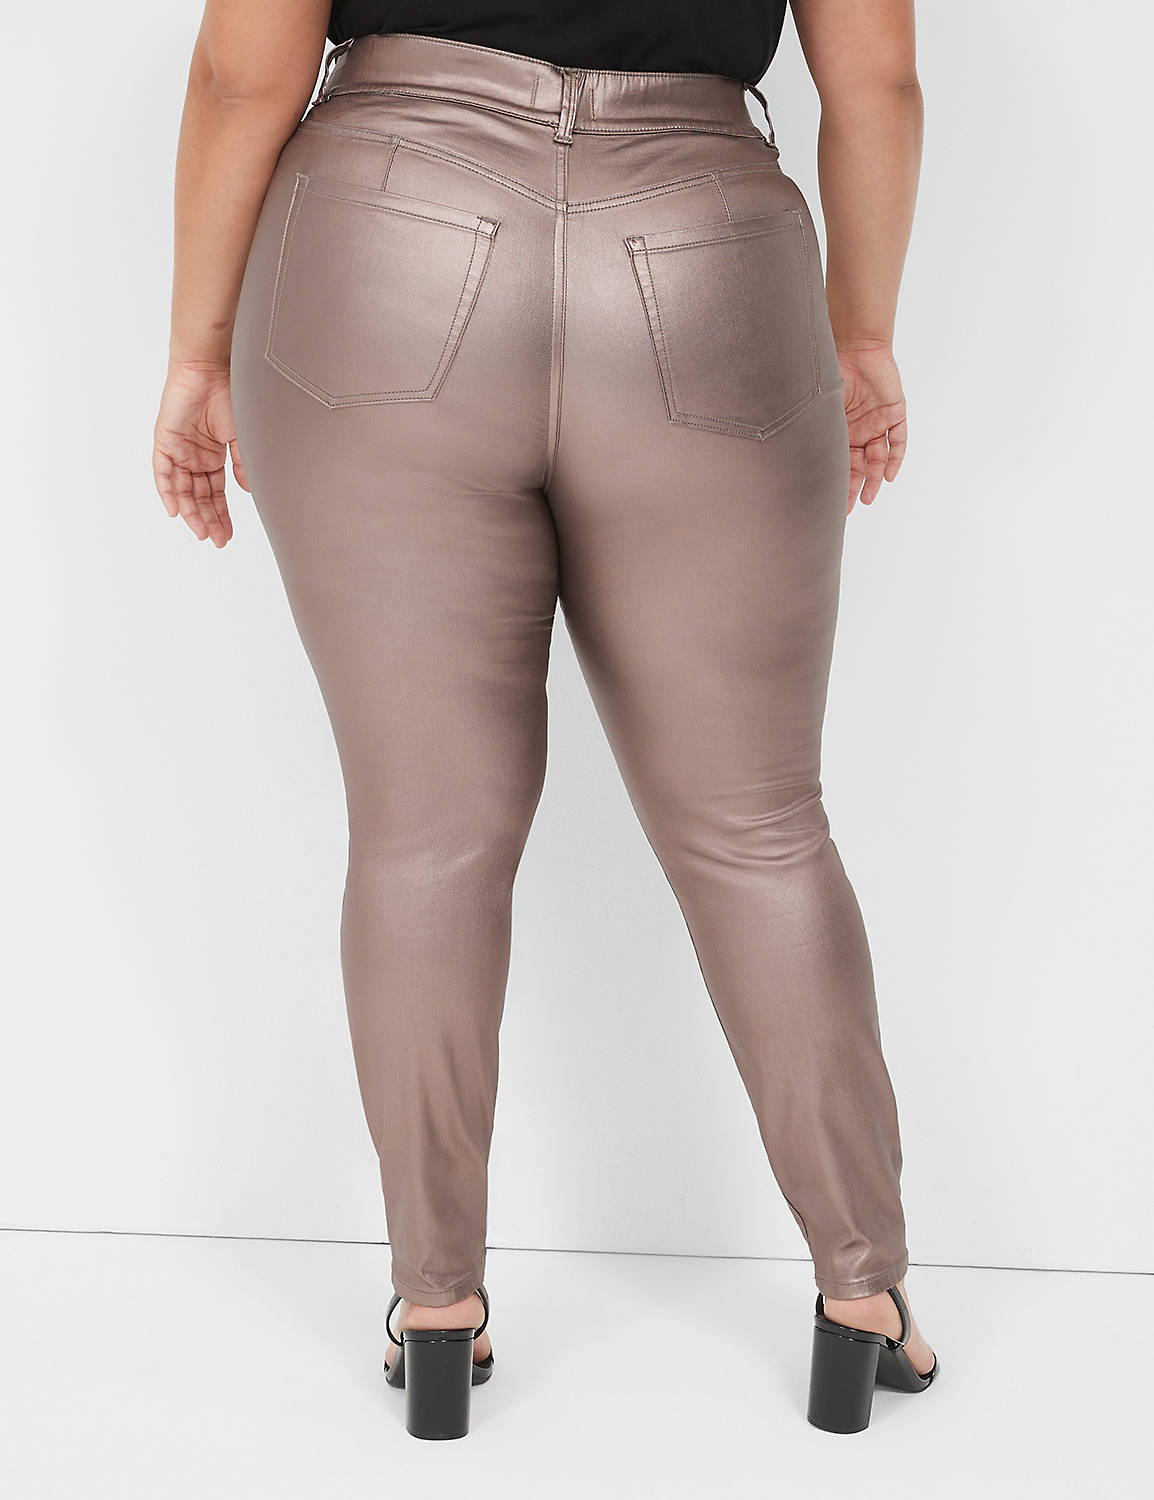 SIGNATURE HIGH RISE PULL ON JEGGING Product Image 2